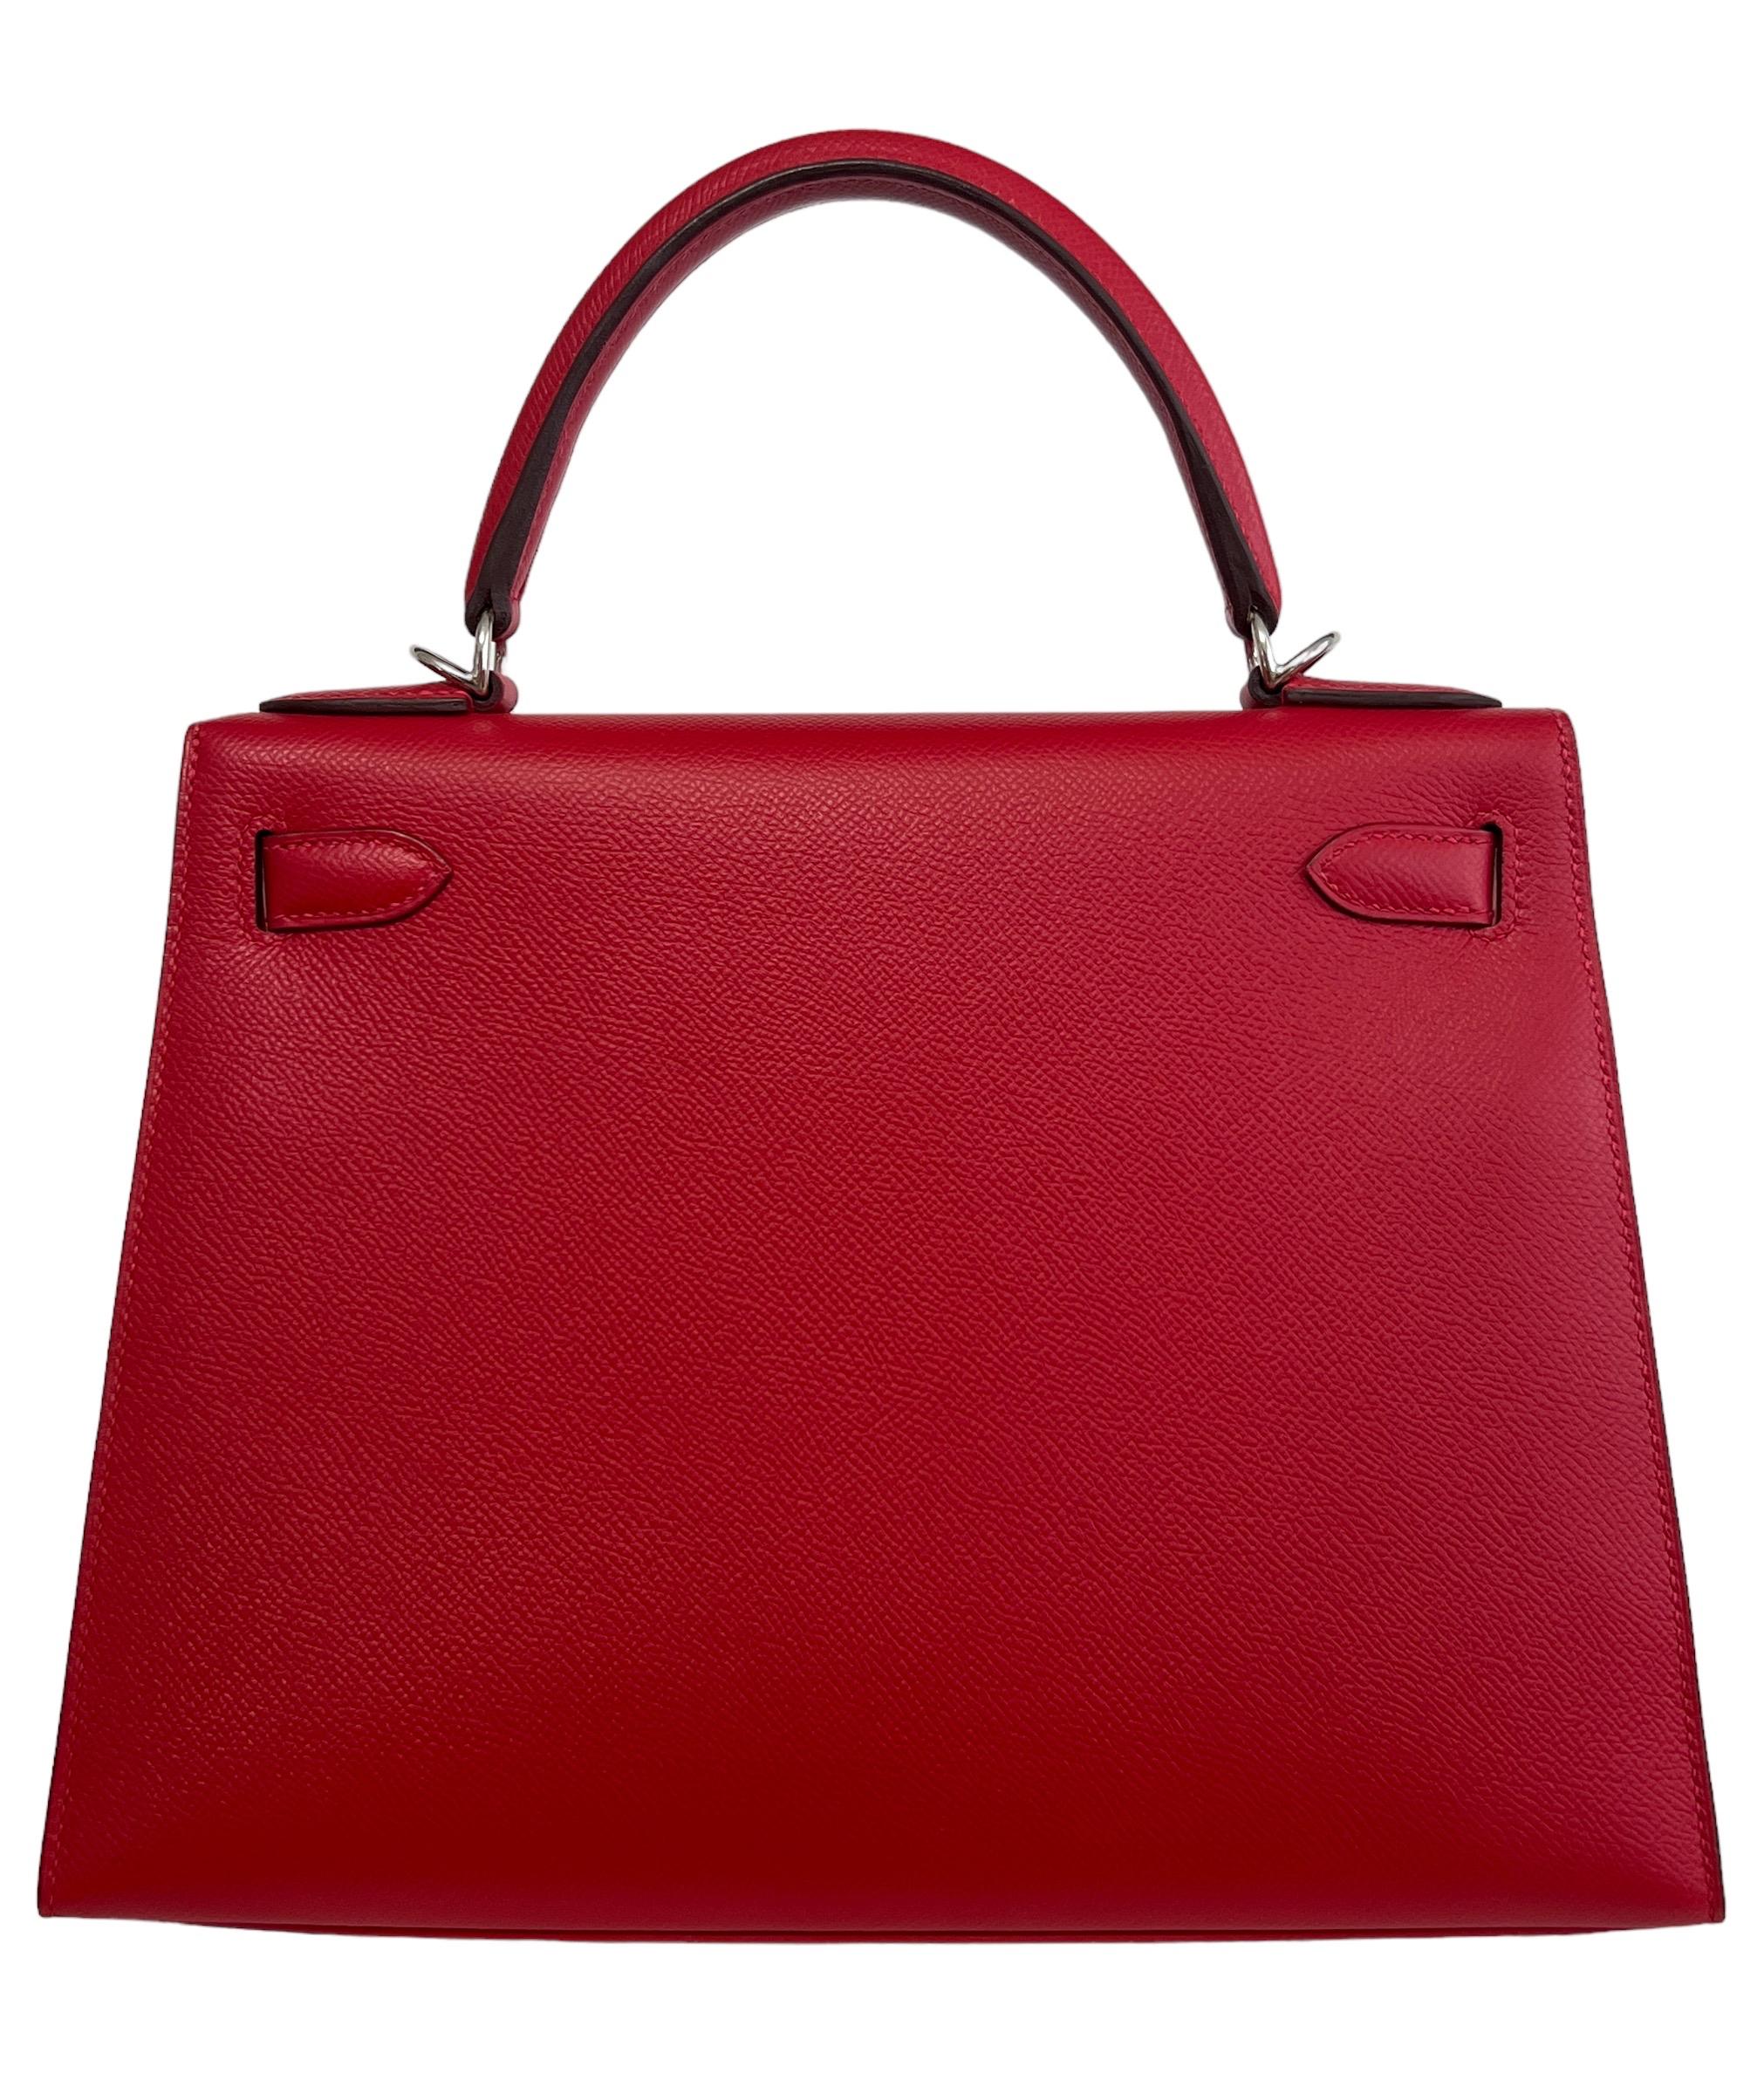 Hermes Kelly 28 Sellier Epsom Leather Rouge Casaque Red Palladium Hardware NEW 1